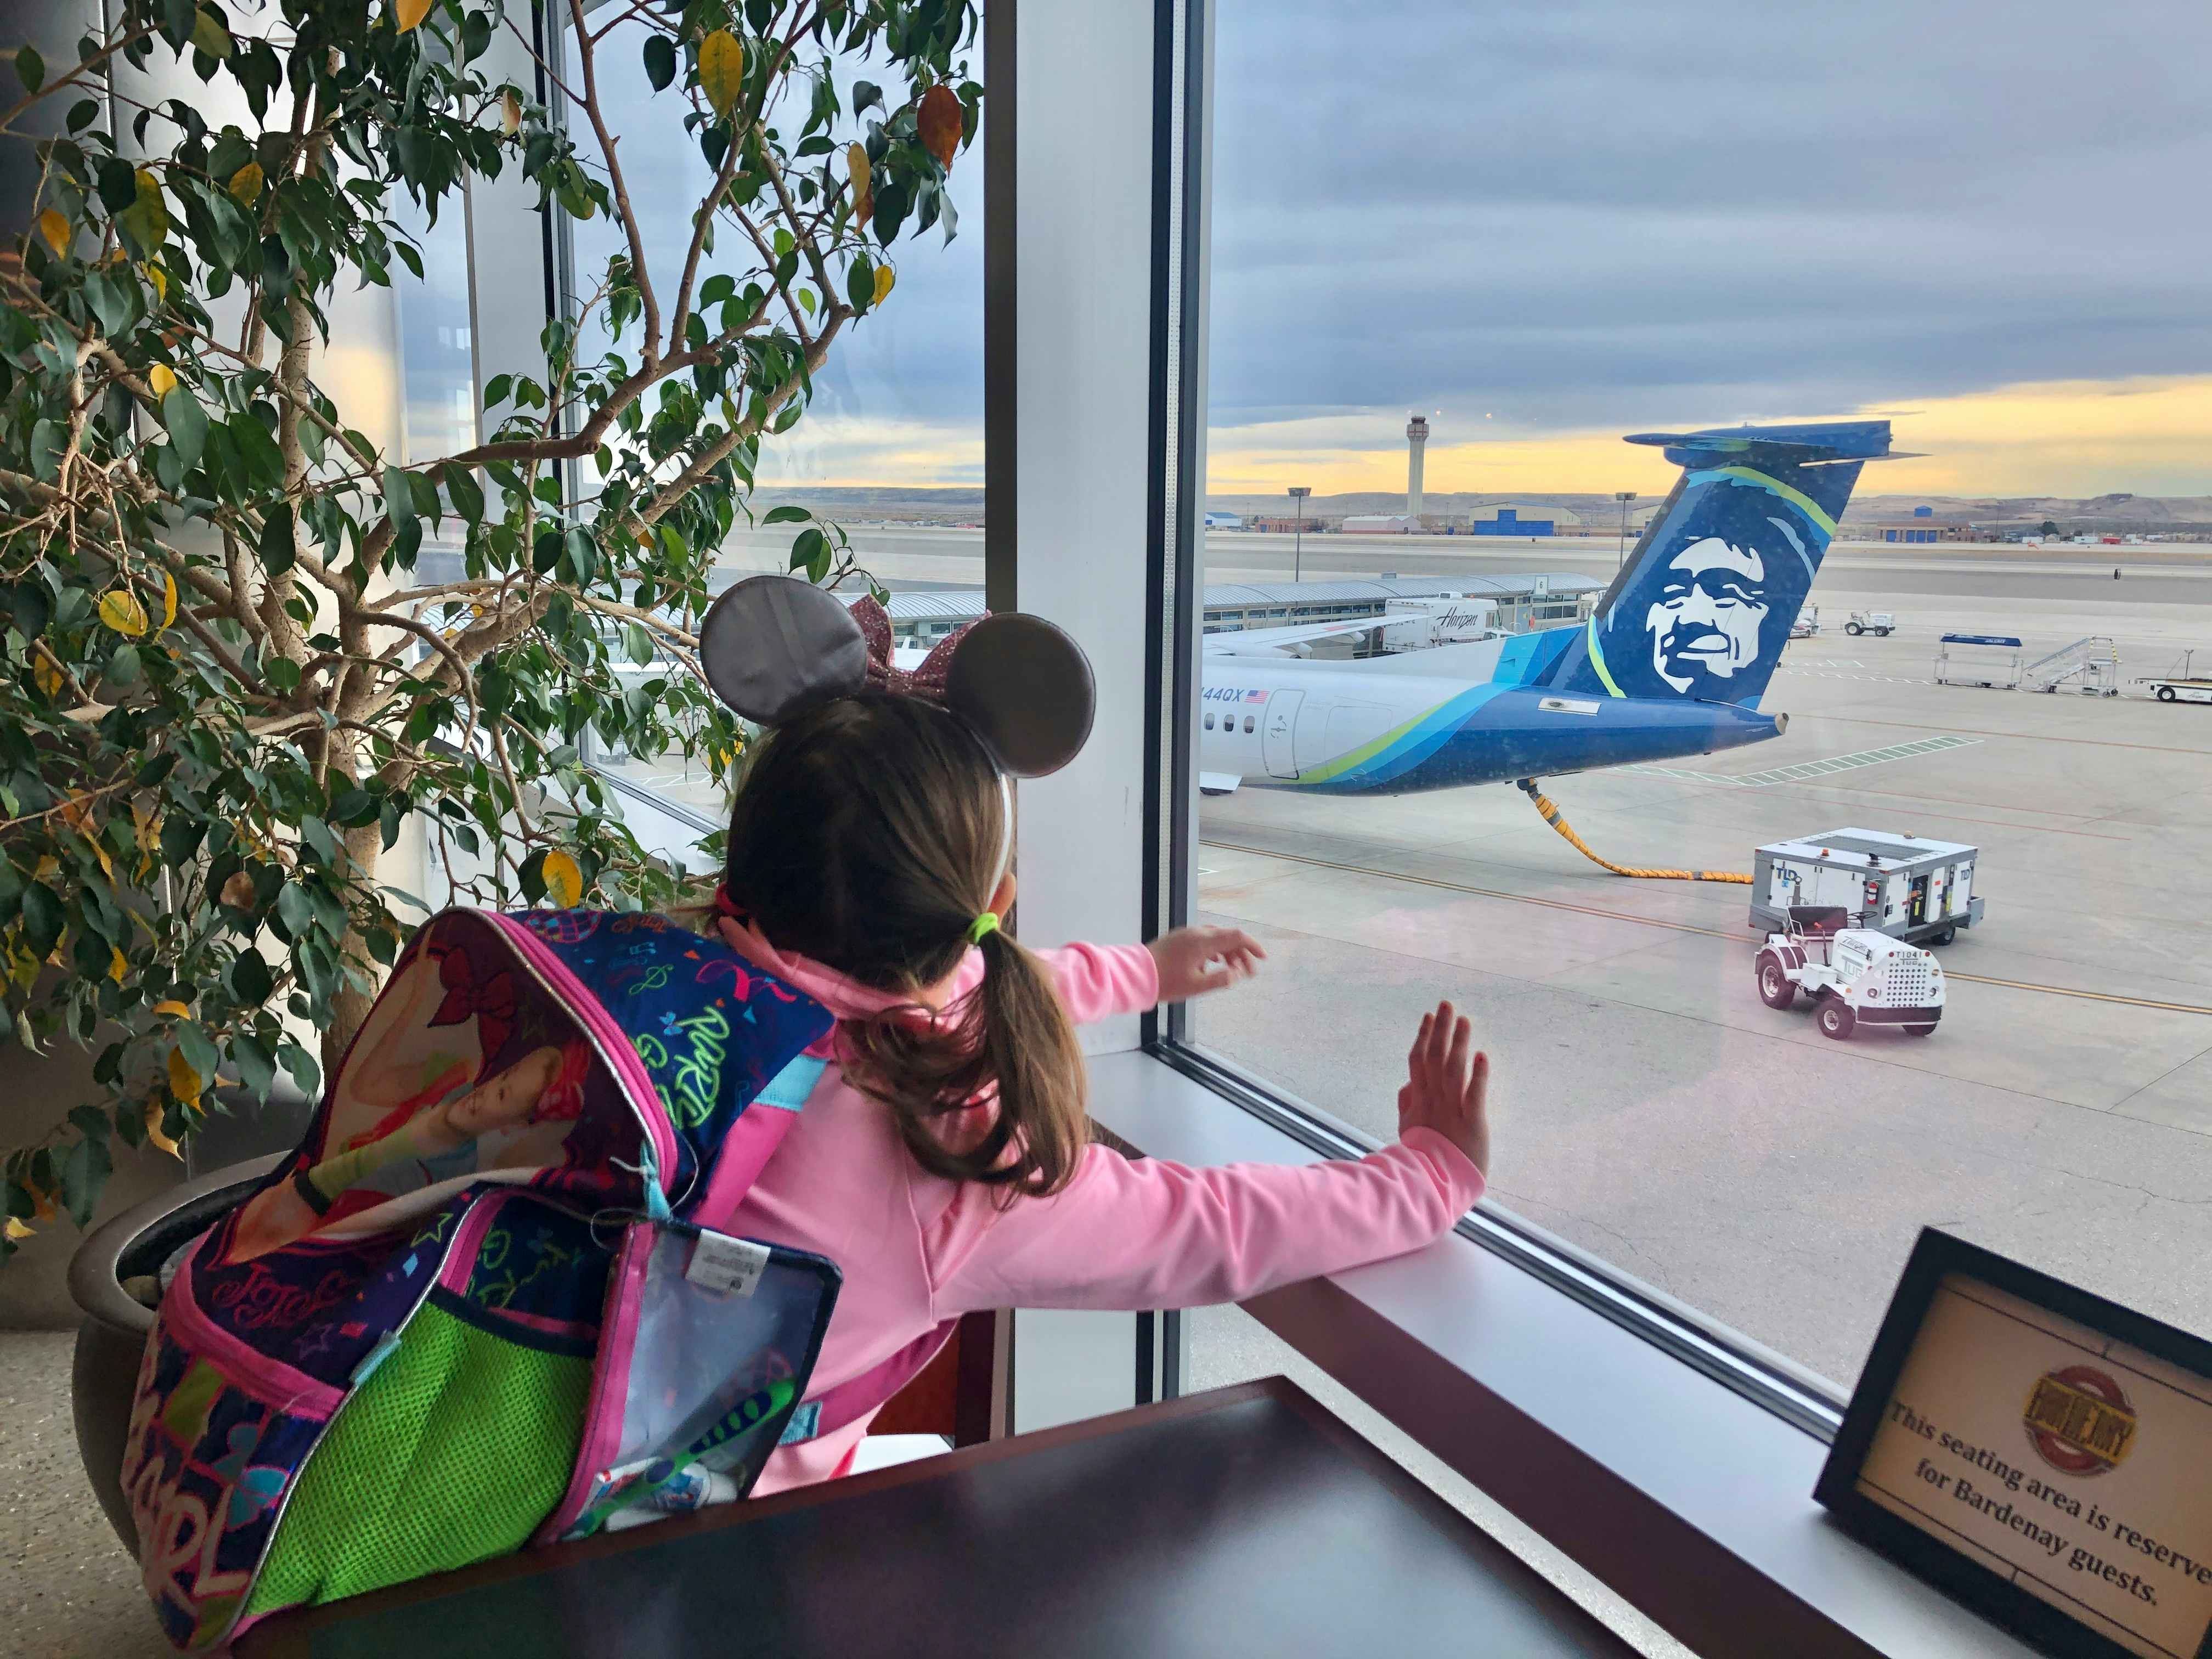 A little girl with Minnie Mouse ears looks out the window at the airport at Alaskan airlines.